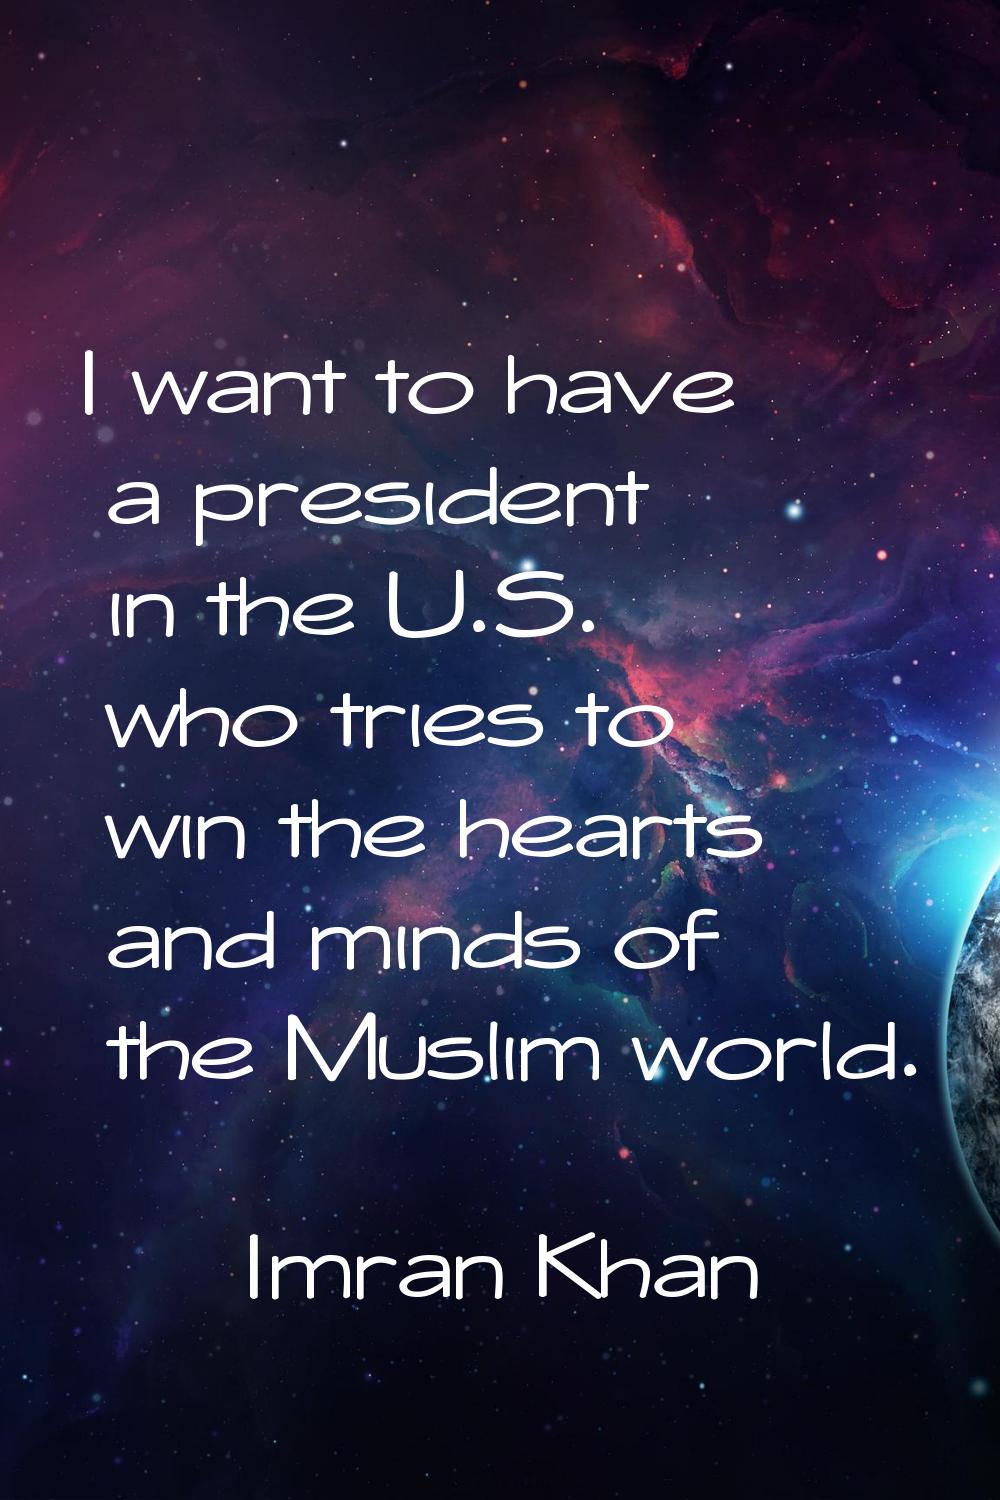 I want to have a president in the U.S. who tries to win the hearts and minds of the Muslim world.